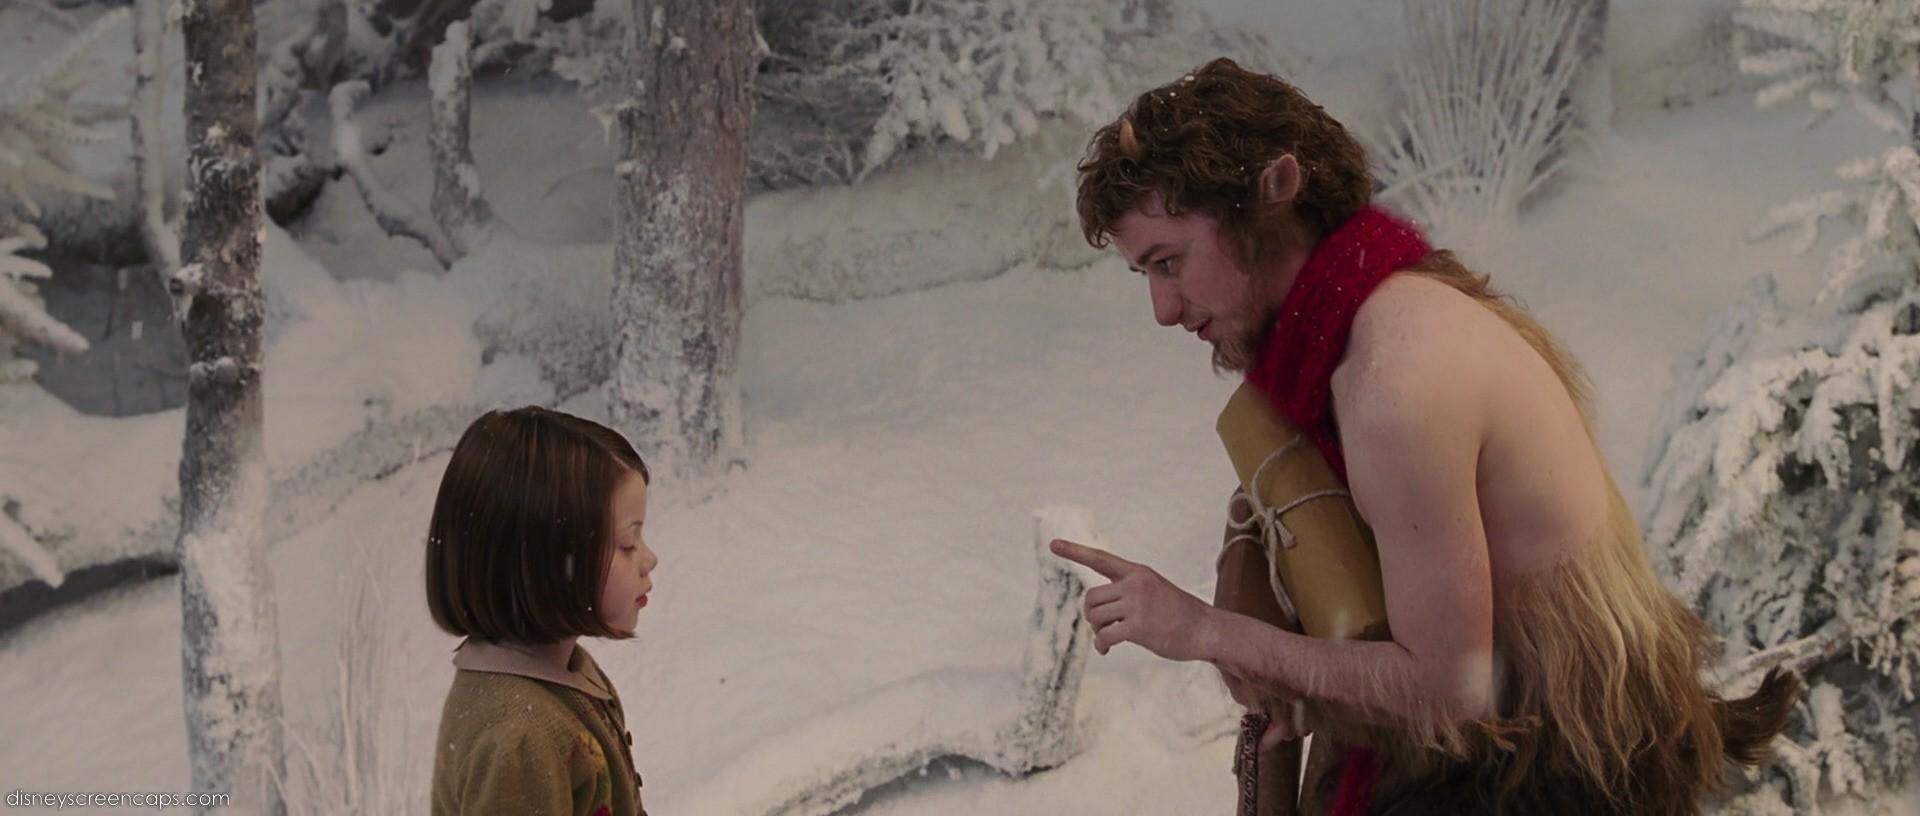 The Chronicles Of Narnia image 15 Picture of Lucy Pevensie and Mr